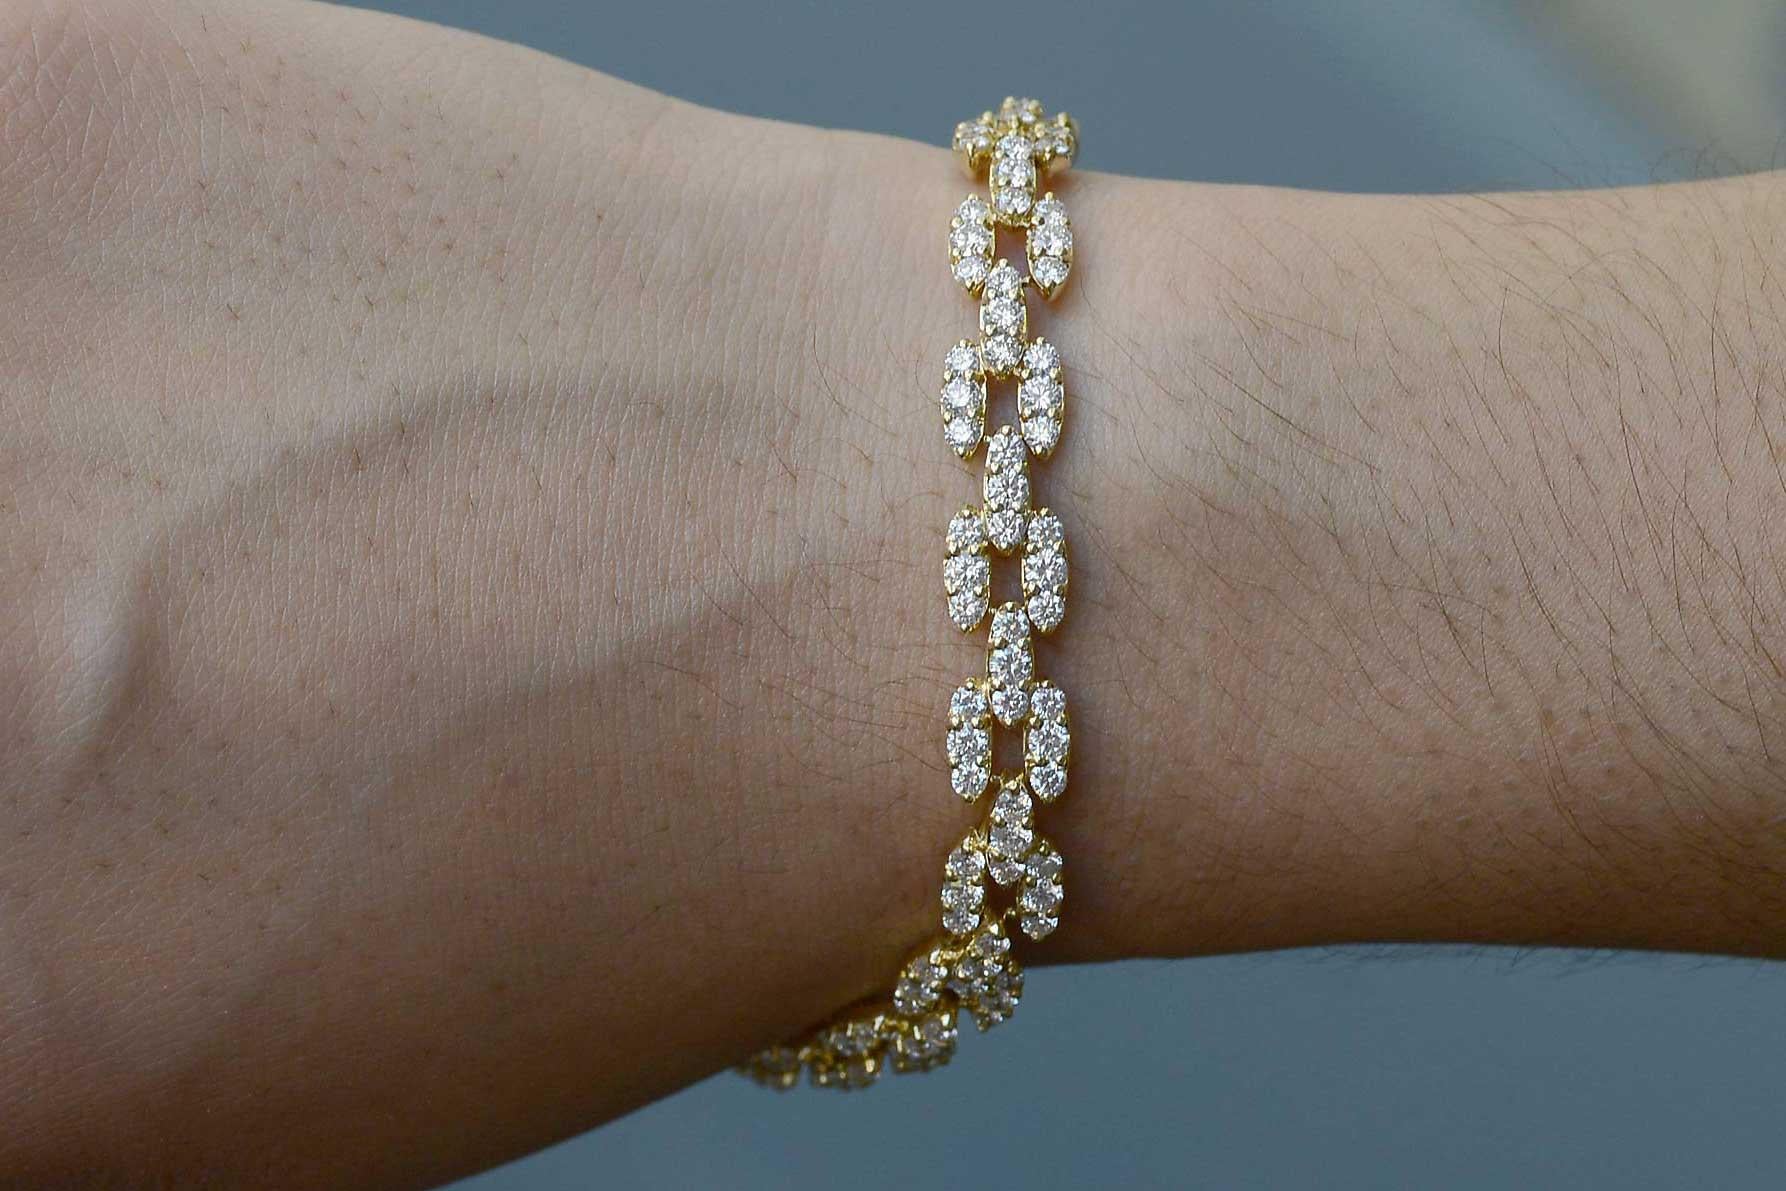 The Philadelphia Modernist Bracelet. An exquisite 1970s 18K yellow gold diamond link bracelet adorned with over 7 carats of extremely attractive and fiery diamonds. 162 individually cut and perfectly matched gems set in an articulating pattern that